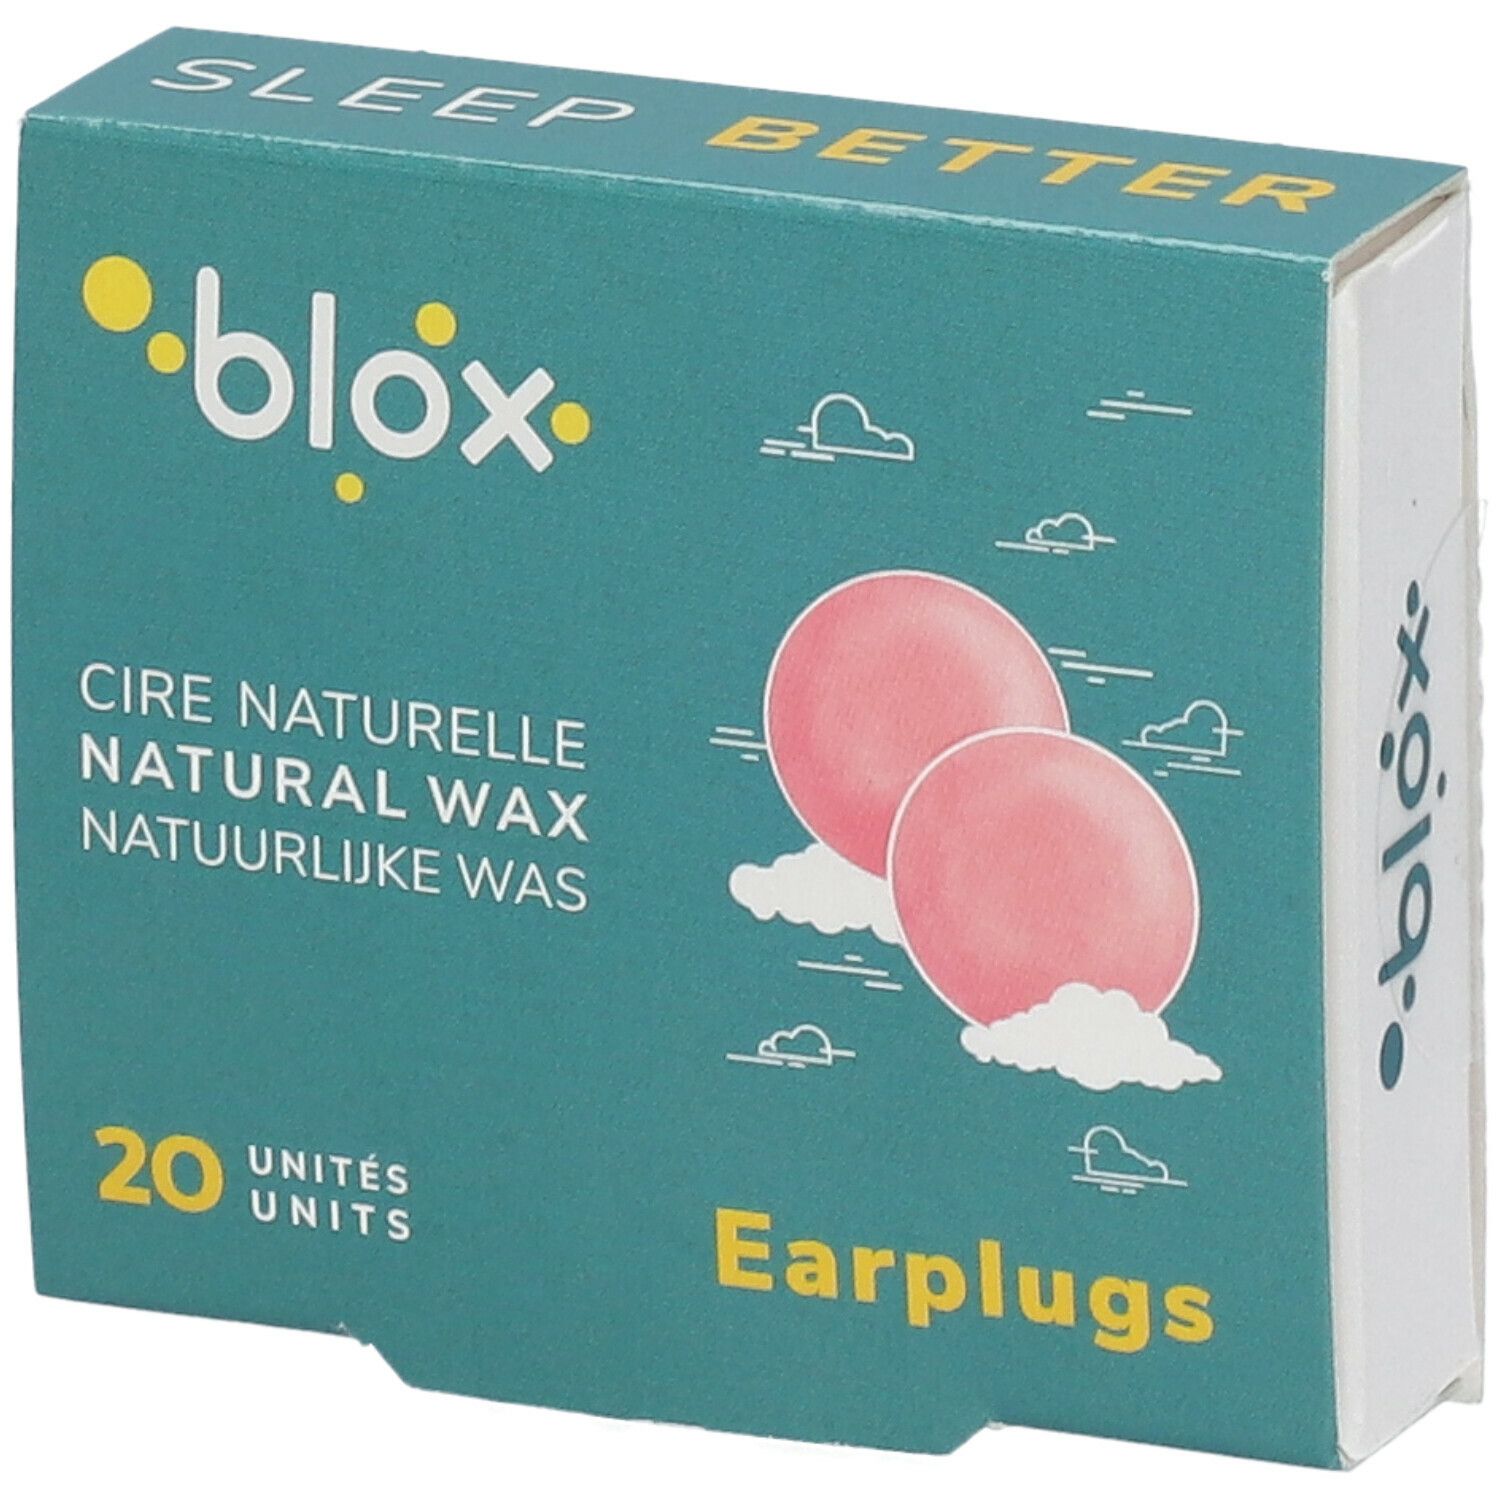 blox Protections Auditives Cire naturelle